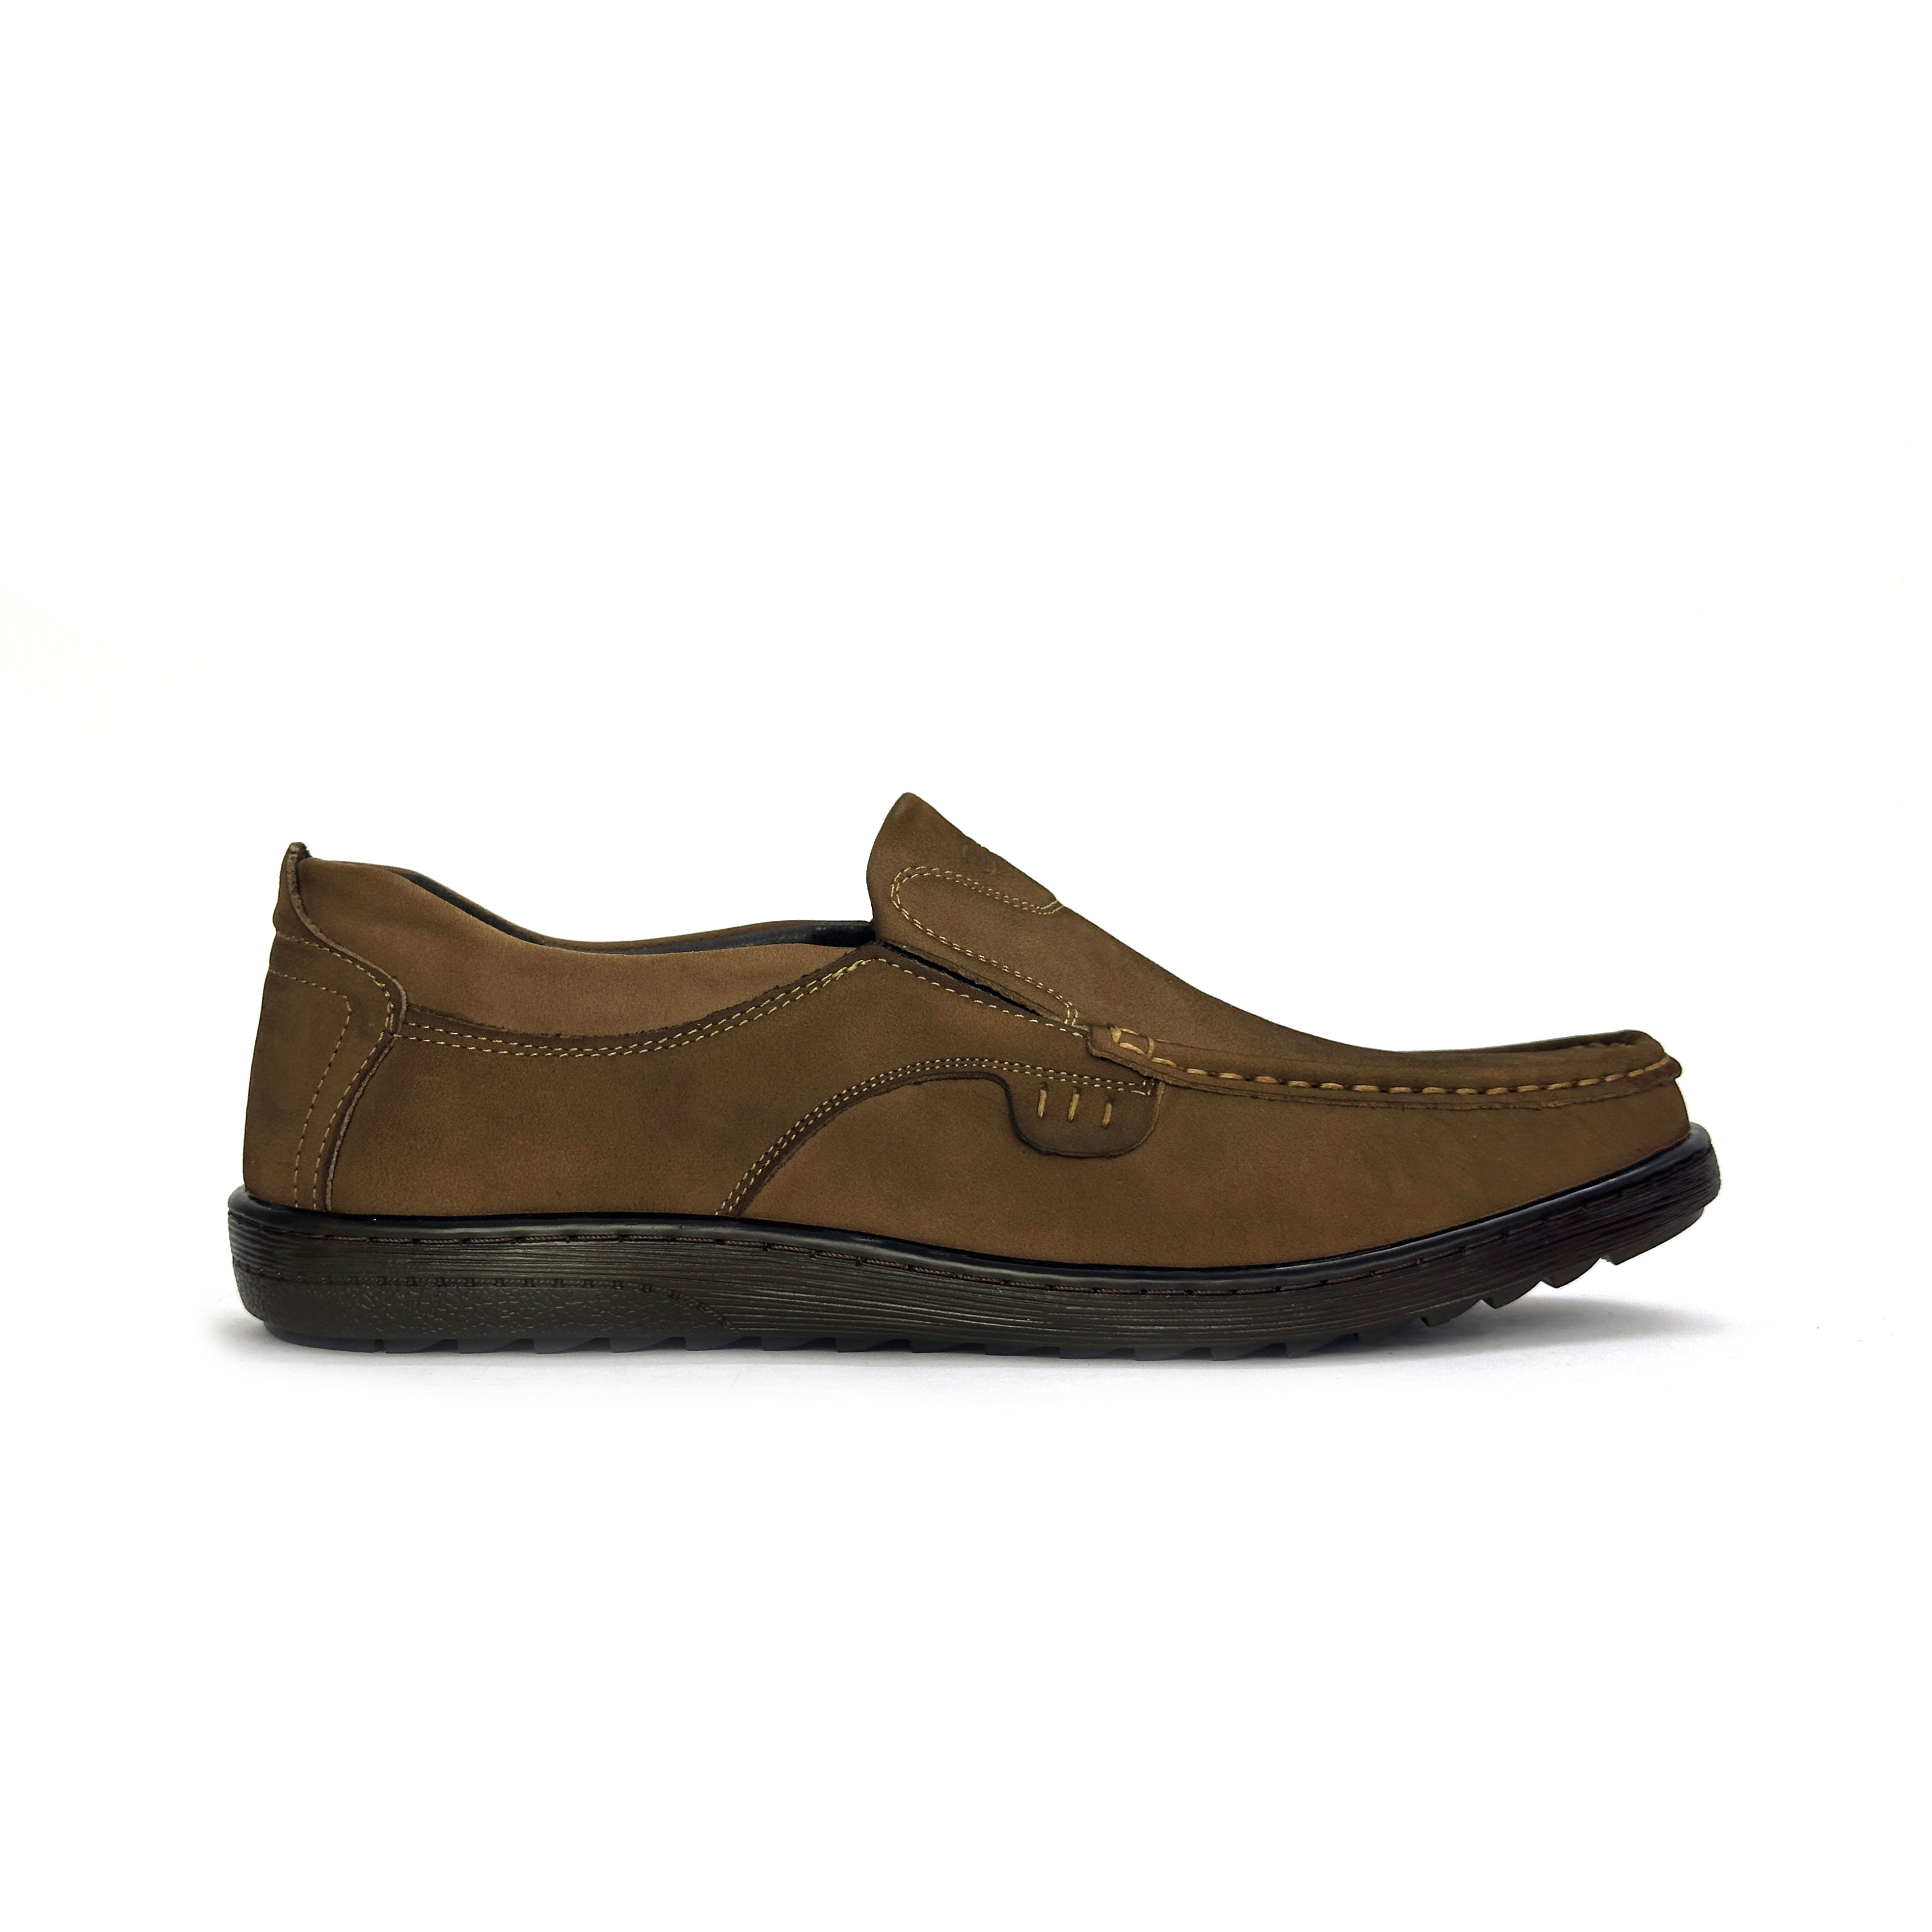 26054-Coffee Premium Leather Slip-on Lightweight Casual Loafers